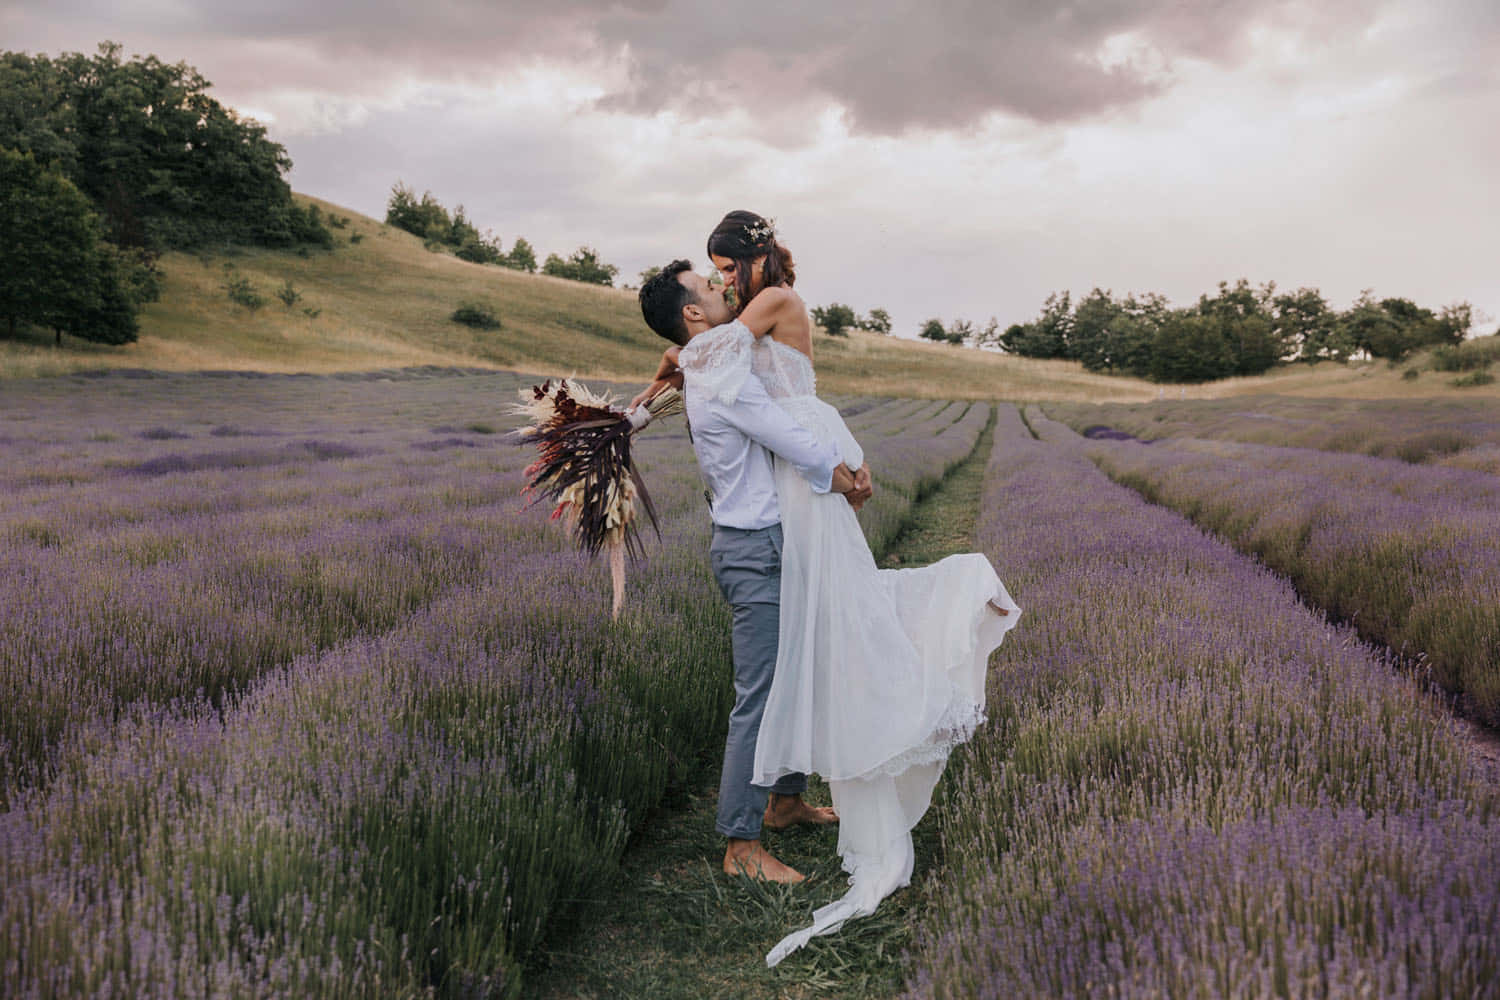 "Take in the beautiful sight of nature's symphony: A stunning lavender field"